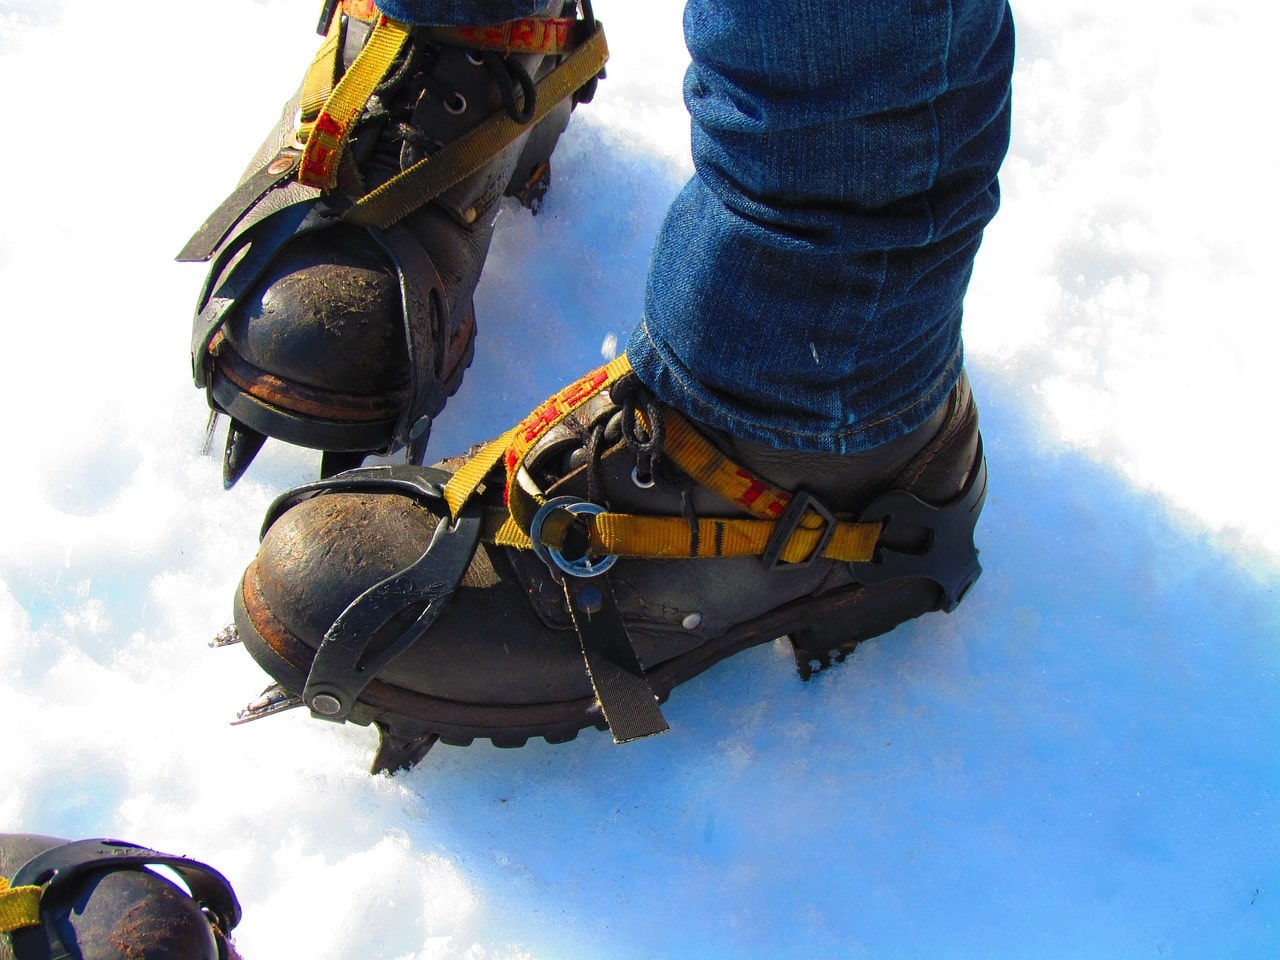 Image of ice clampons for boots.